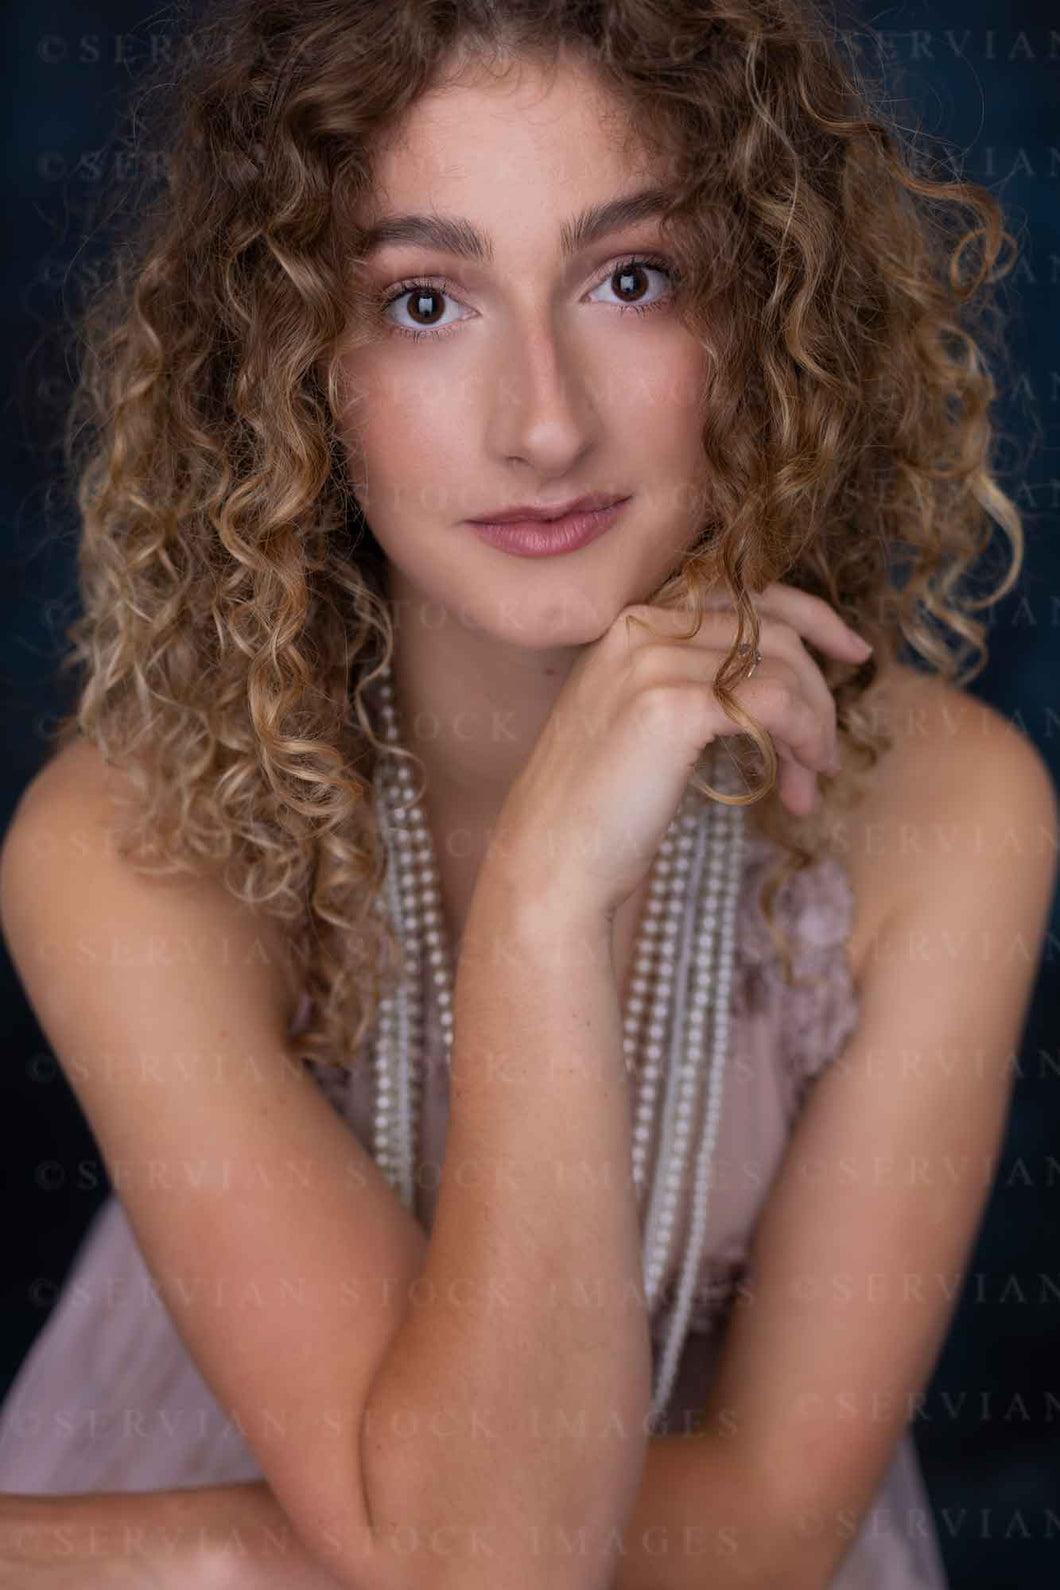 Contemporary woman with curly hair and pearl necklaces  (Sav 0413)